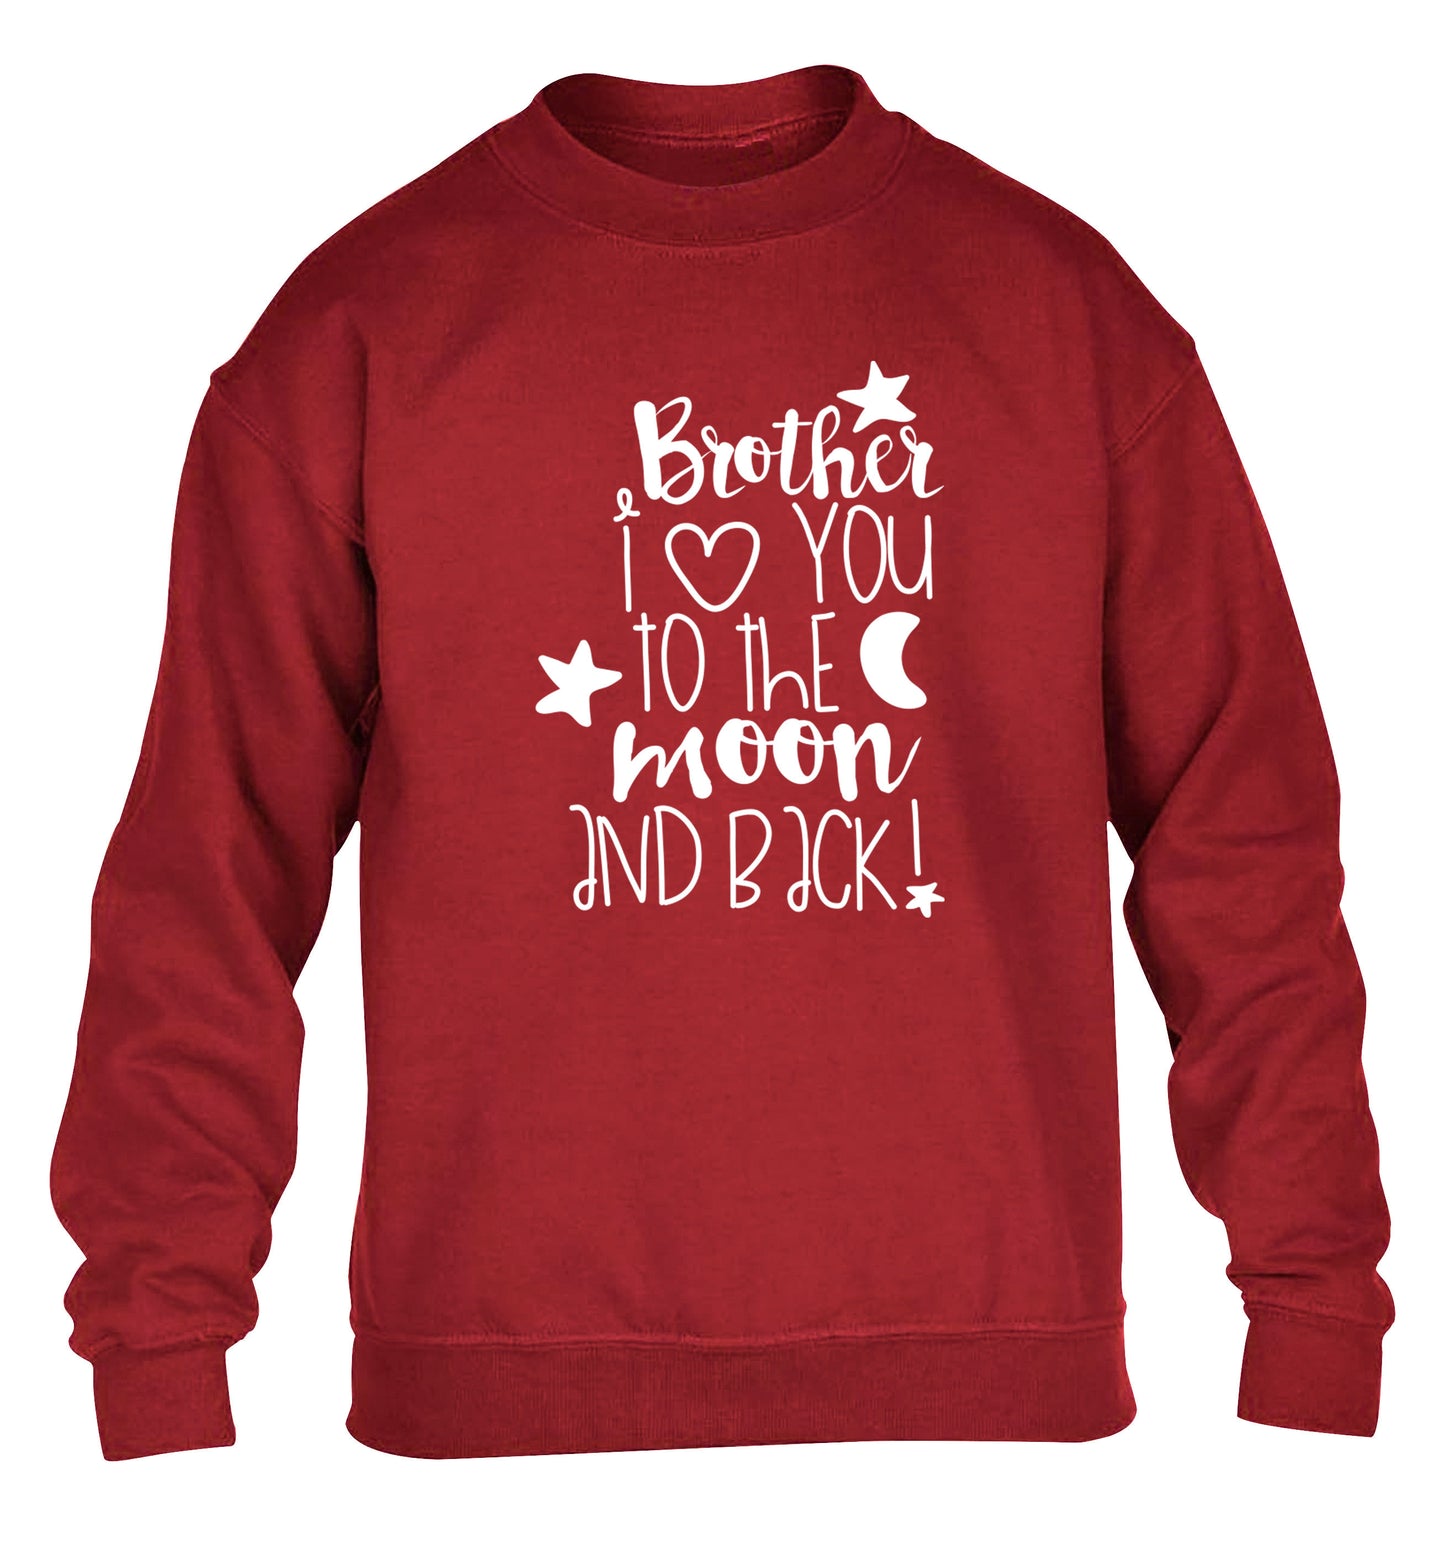 Brother I love you to the moon and back children's grey  sweater 12-14 Years